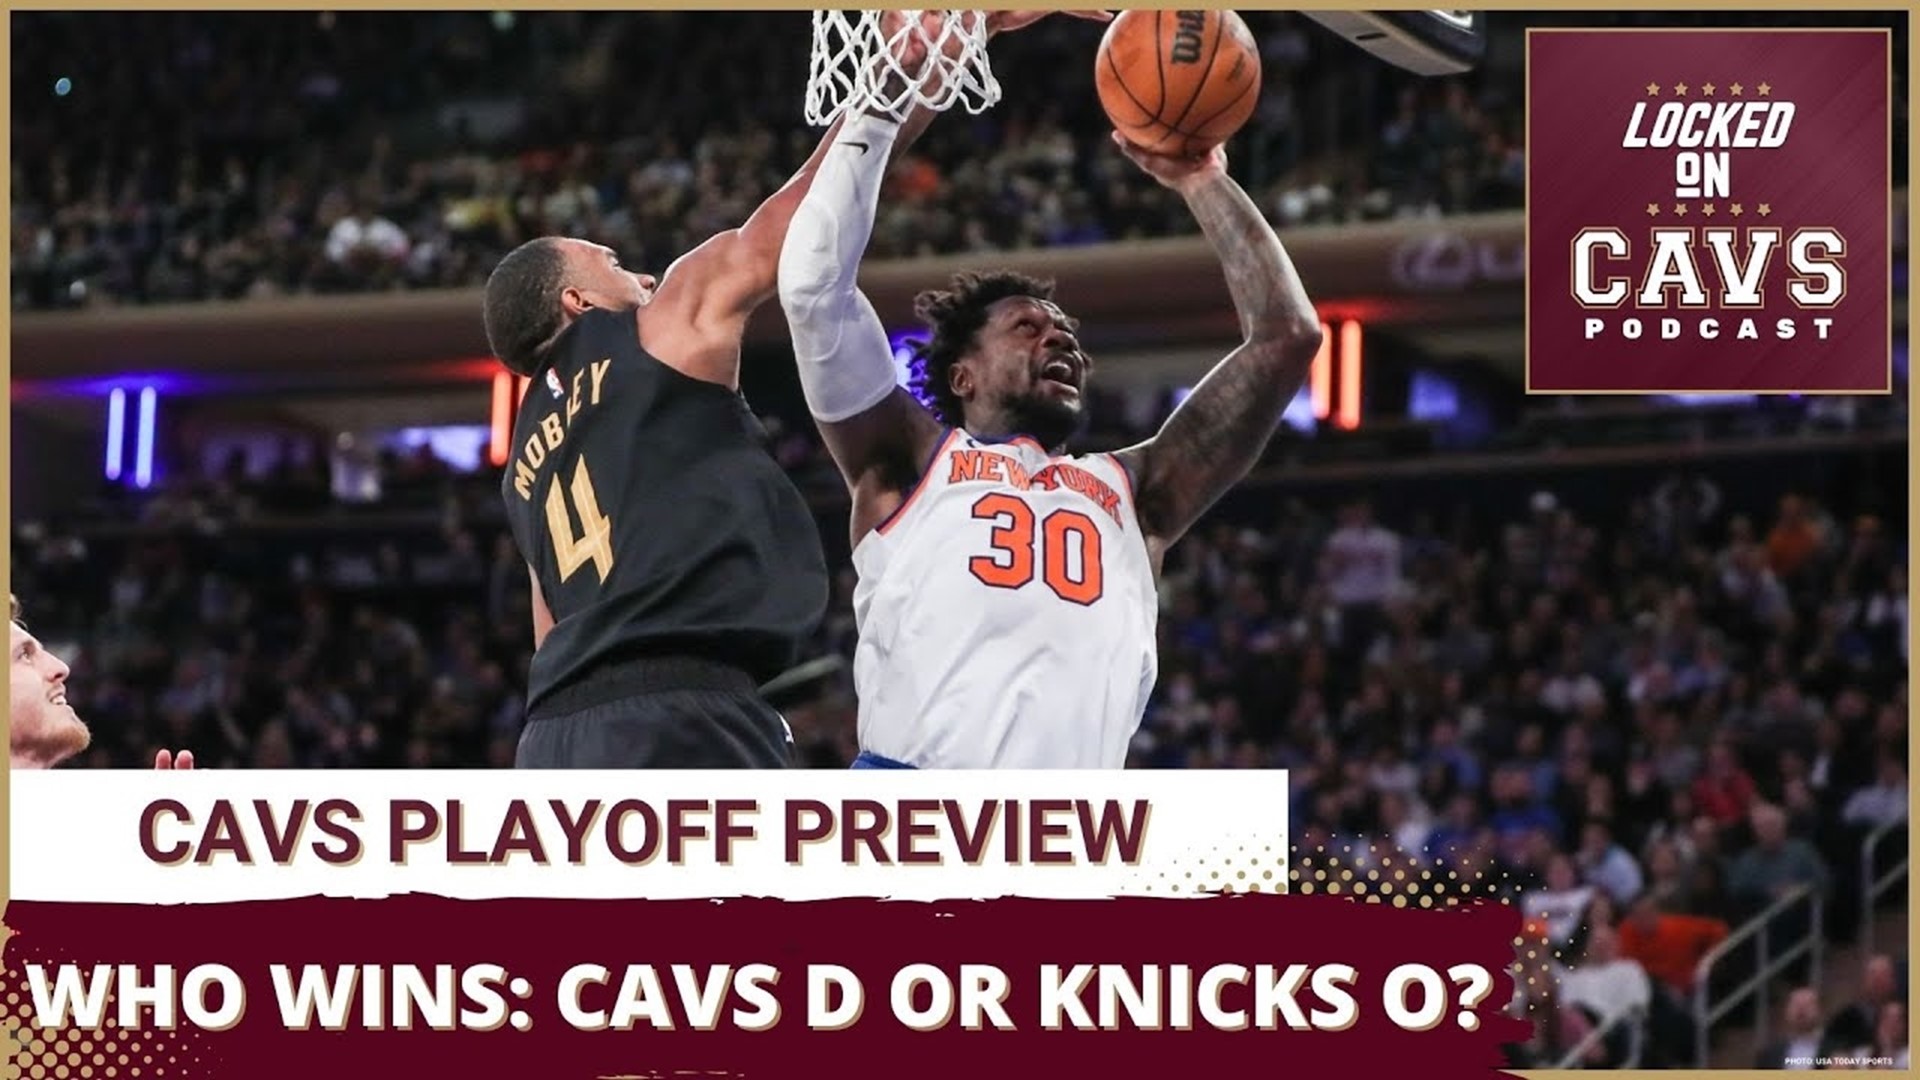 Who wins out: The Cavs’ defense or the Knicks’ offense? | Cleveland Cavaliers podcast